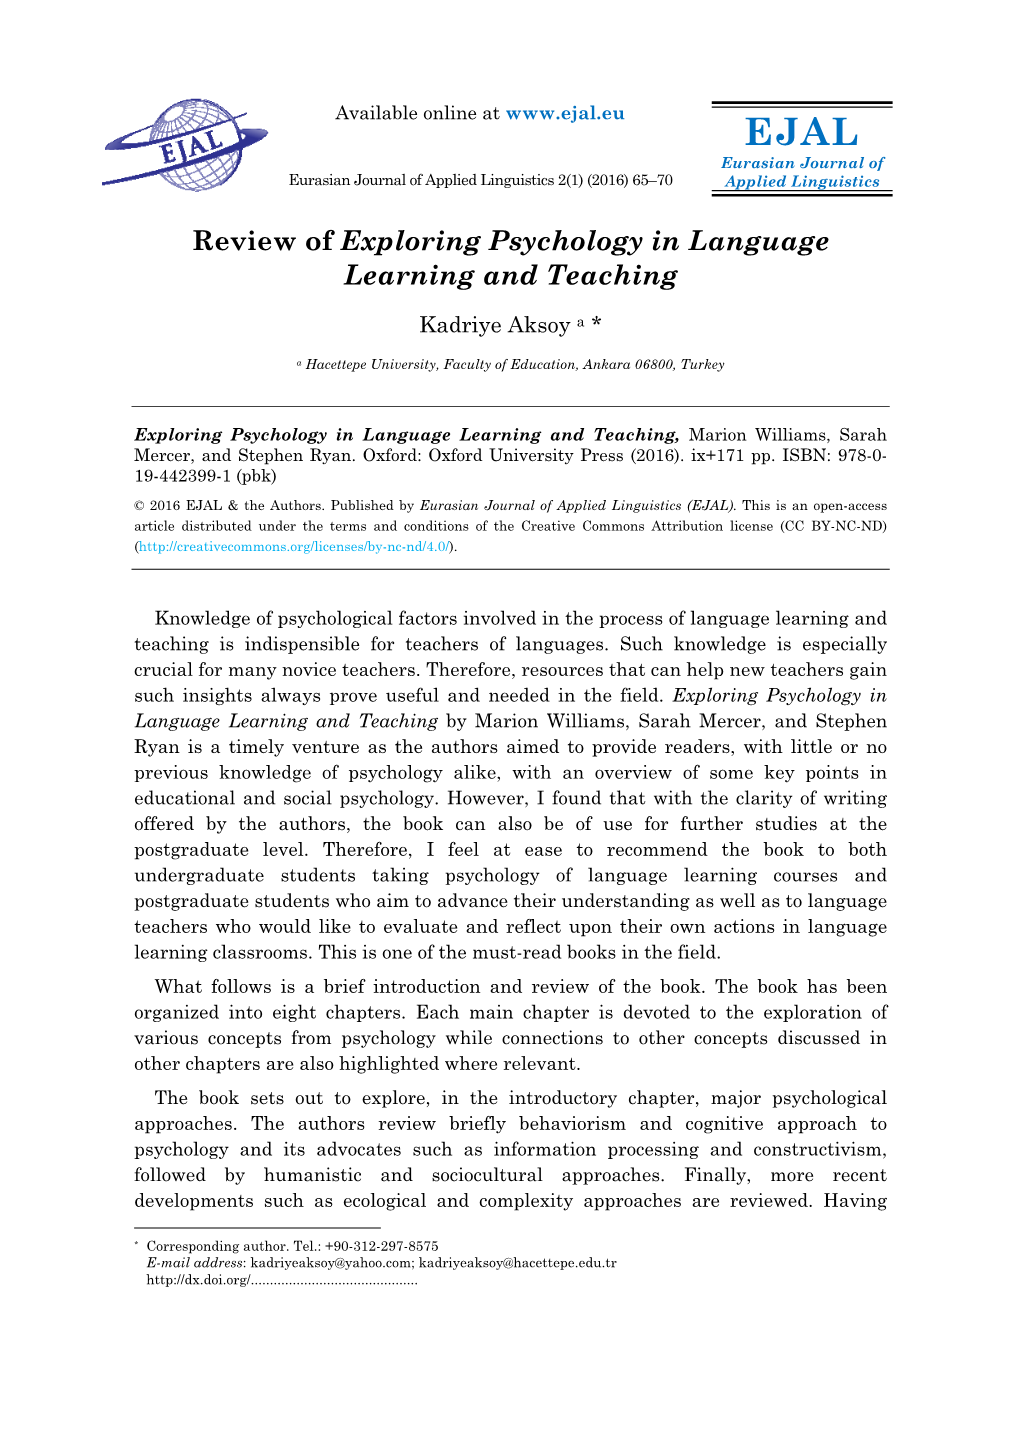 Review of Exploring Psychology in Language Learning and Teaching